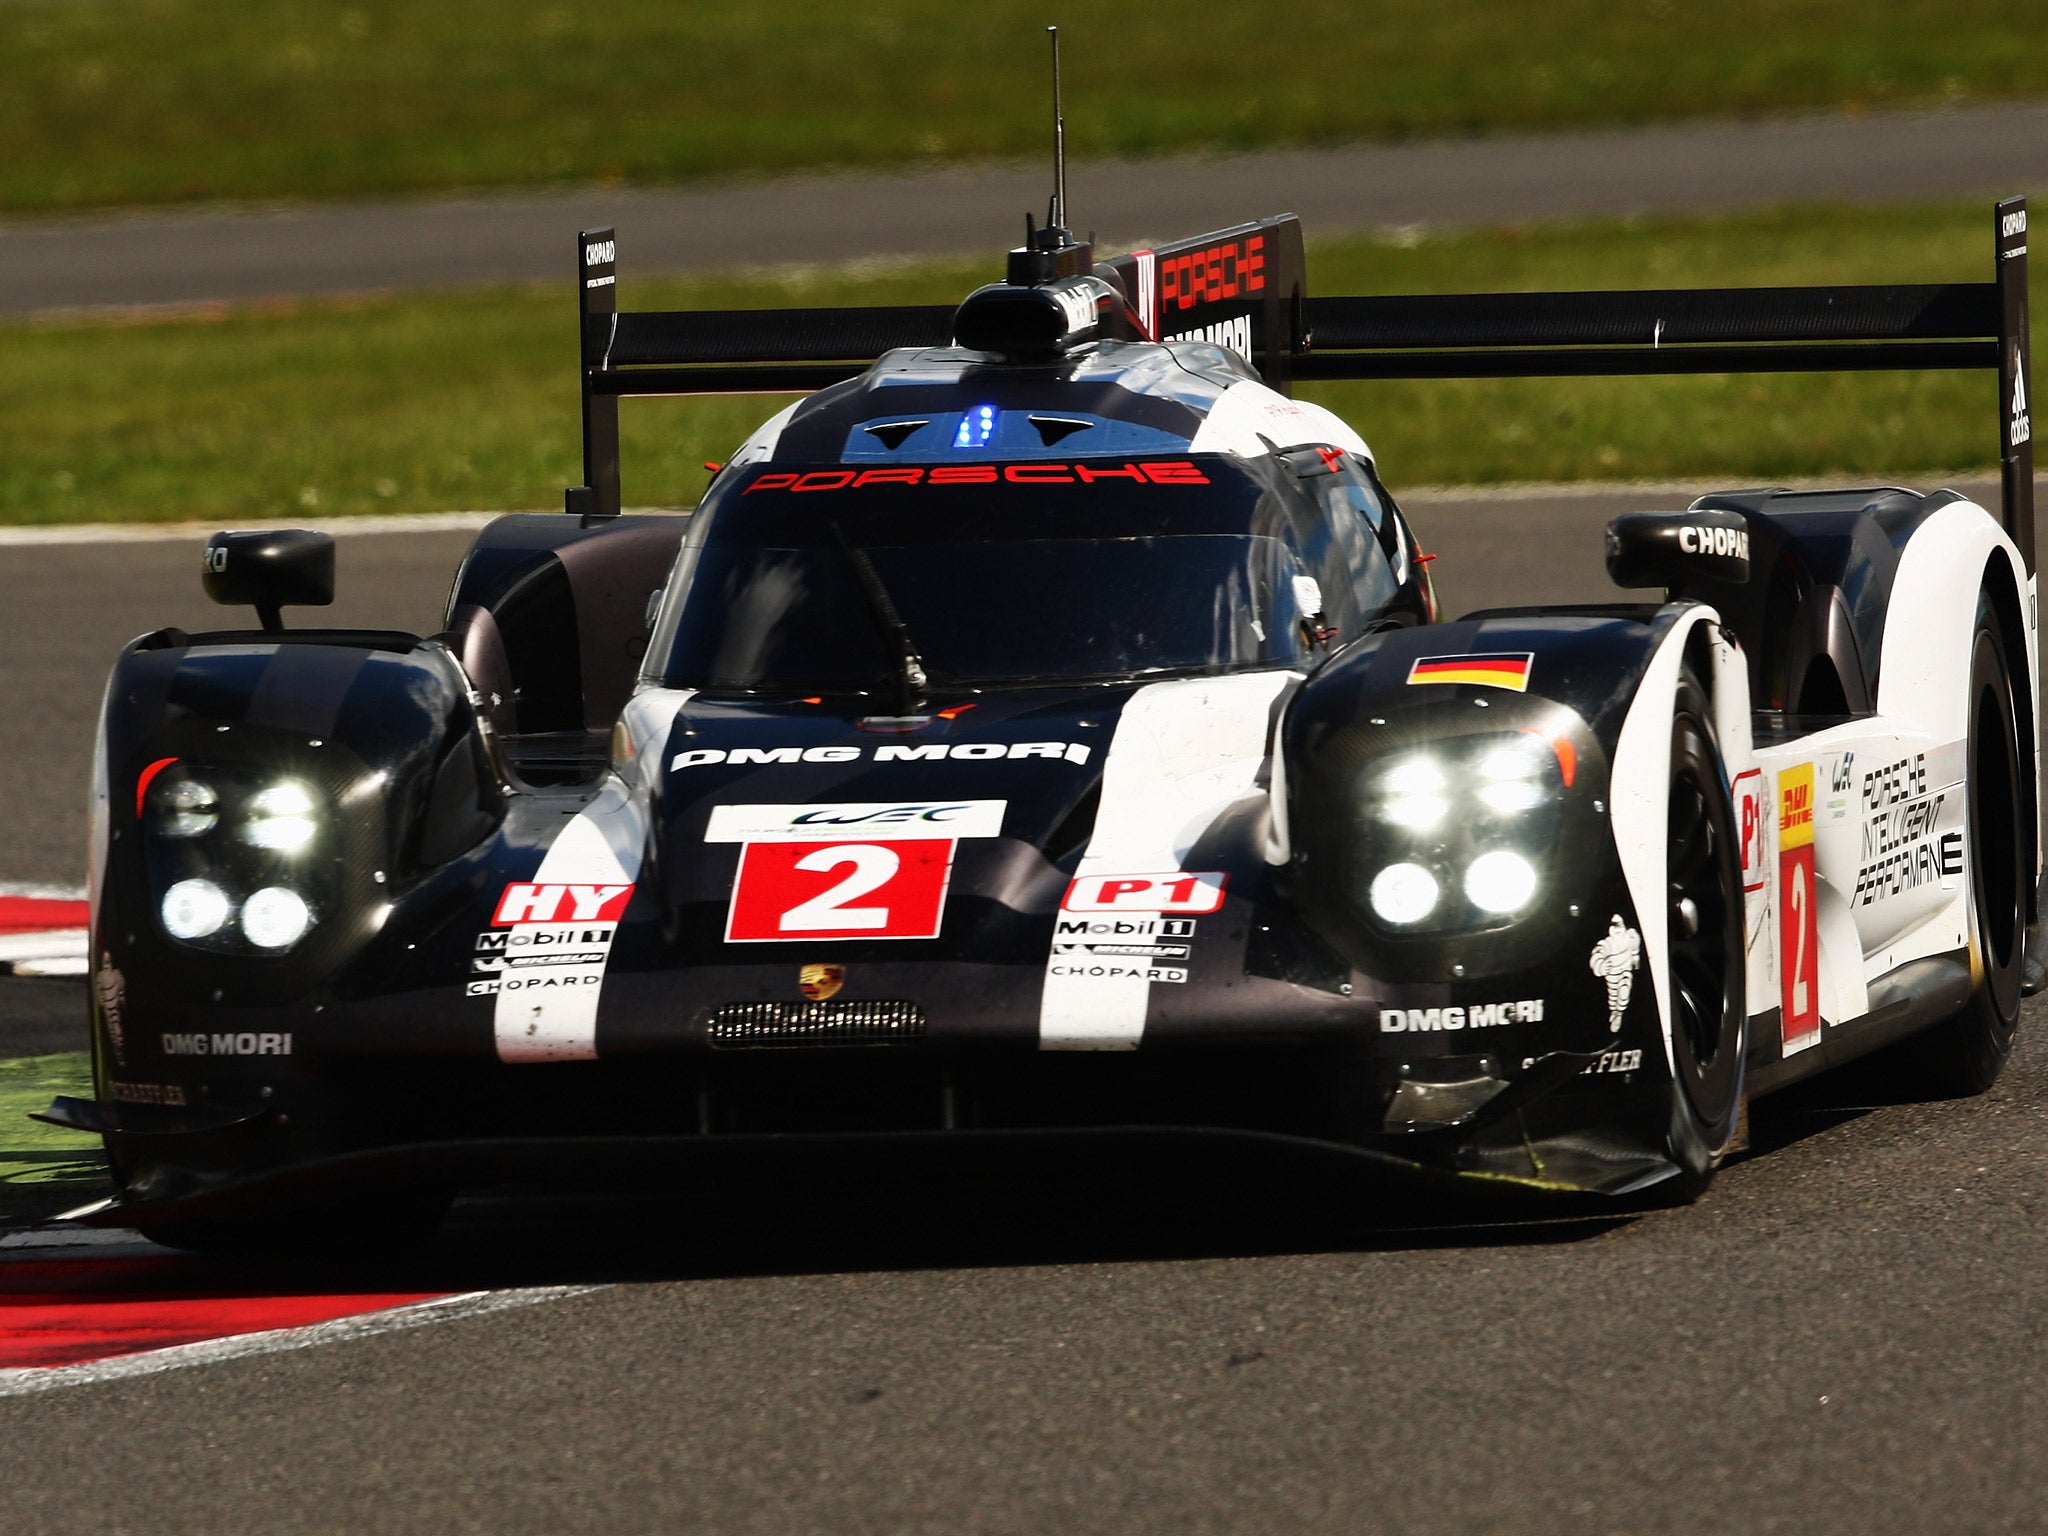 The No 2 Porsche inherited the race victory due to Audi's exclusion